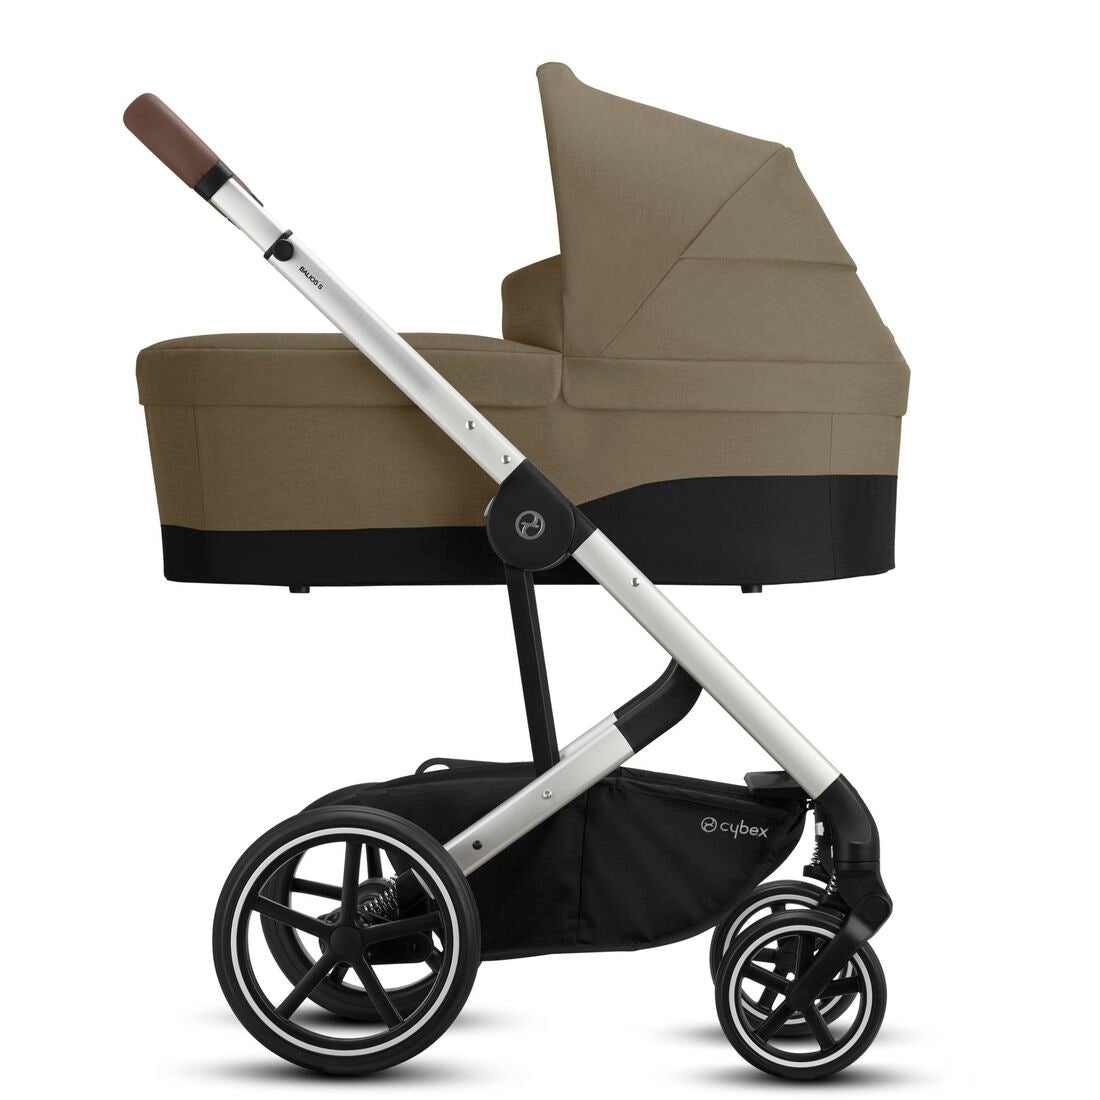 Cybex Balios S Lux Baby Stroller and Cot S, Classic Beige - ANB Baby -$500 - $1000